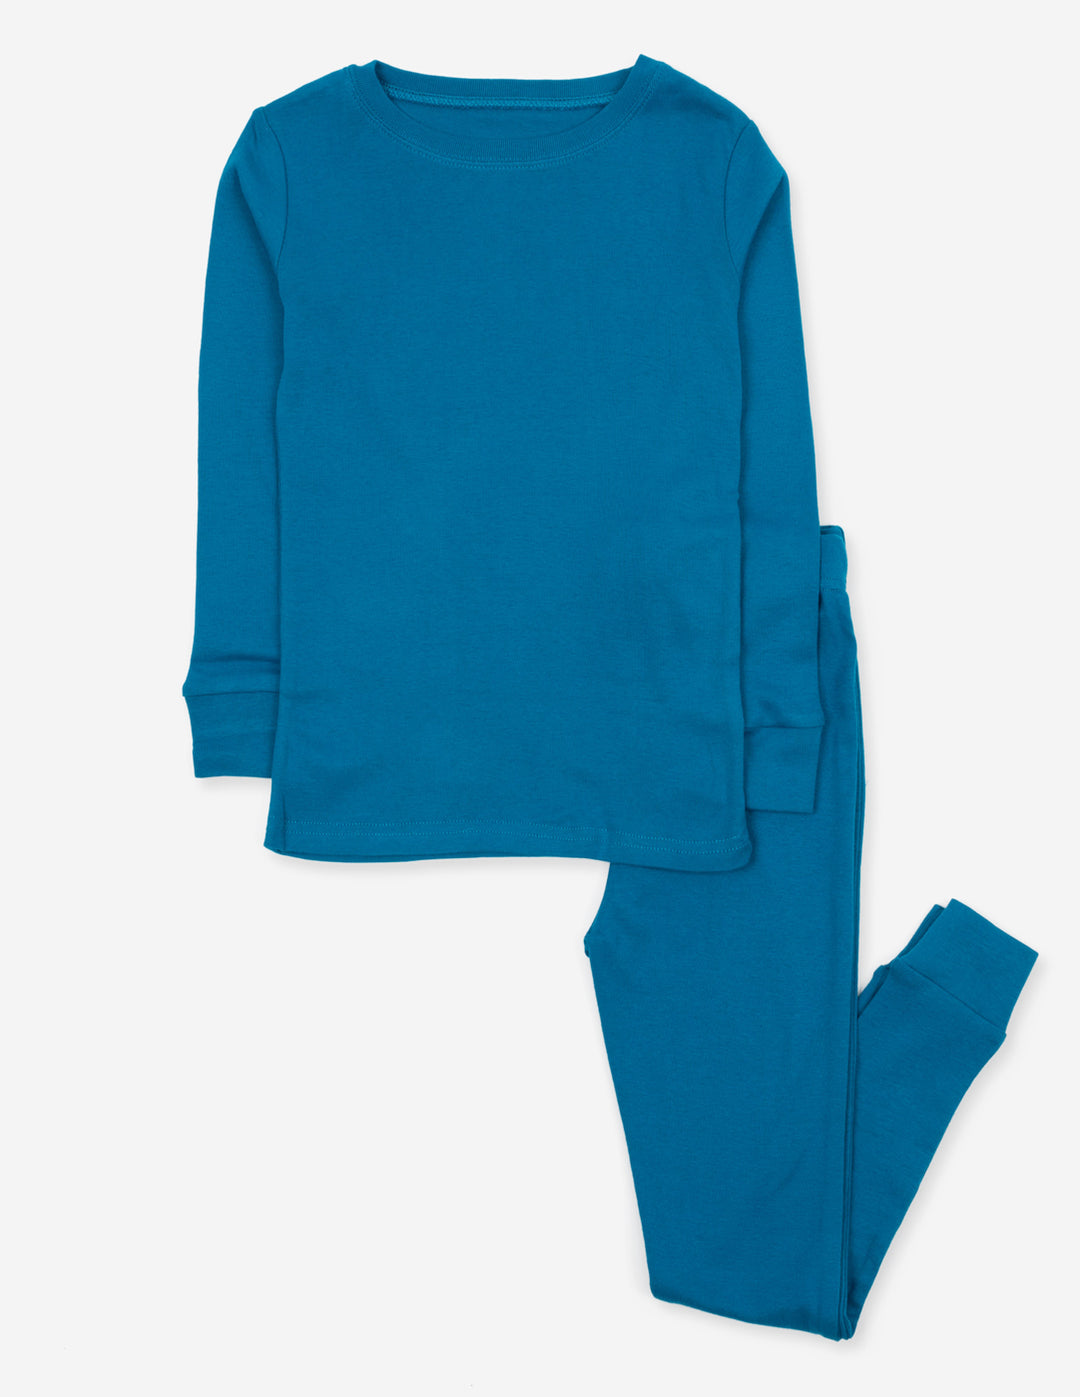 solid color teal blue long sleeve pajamas